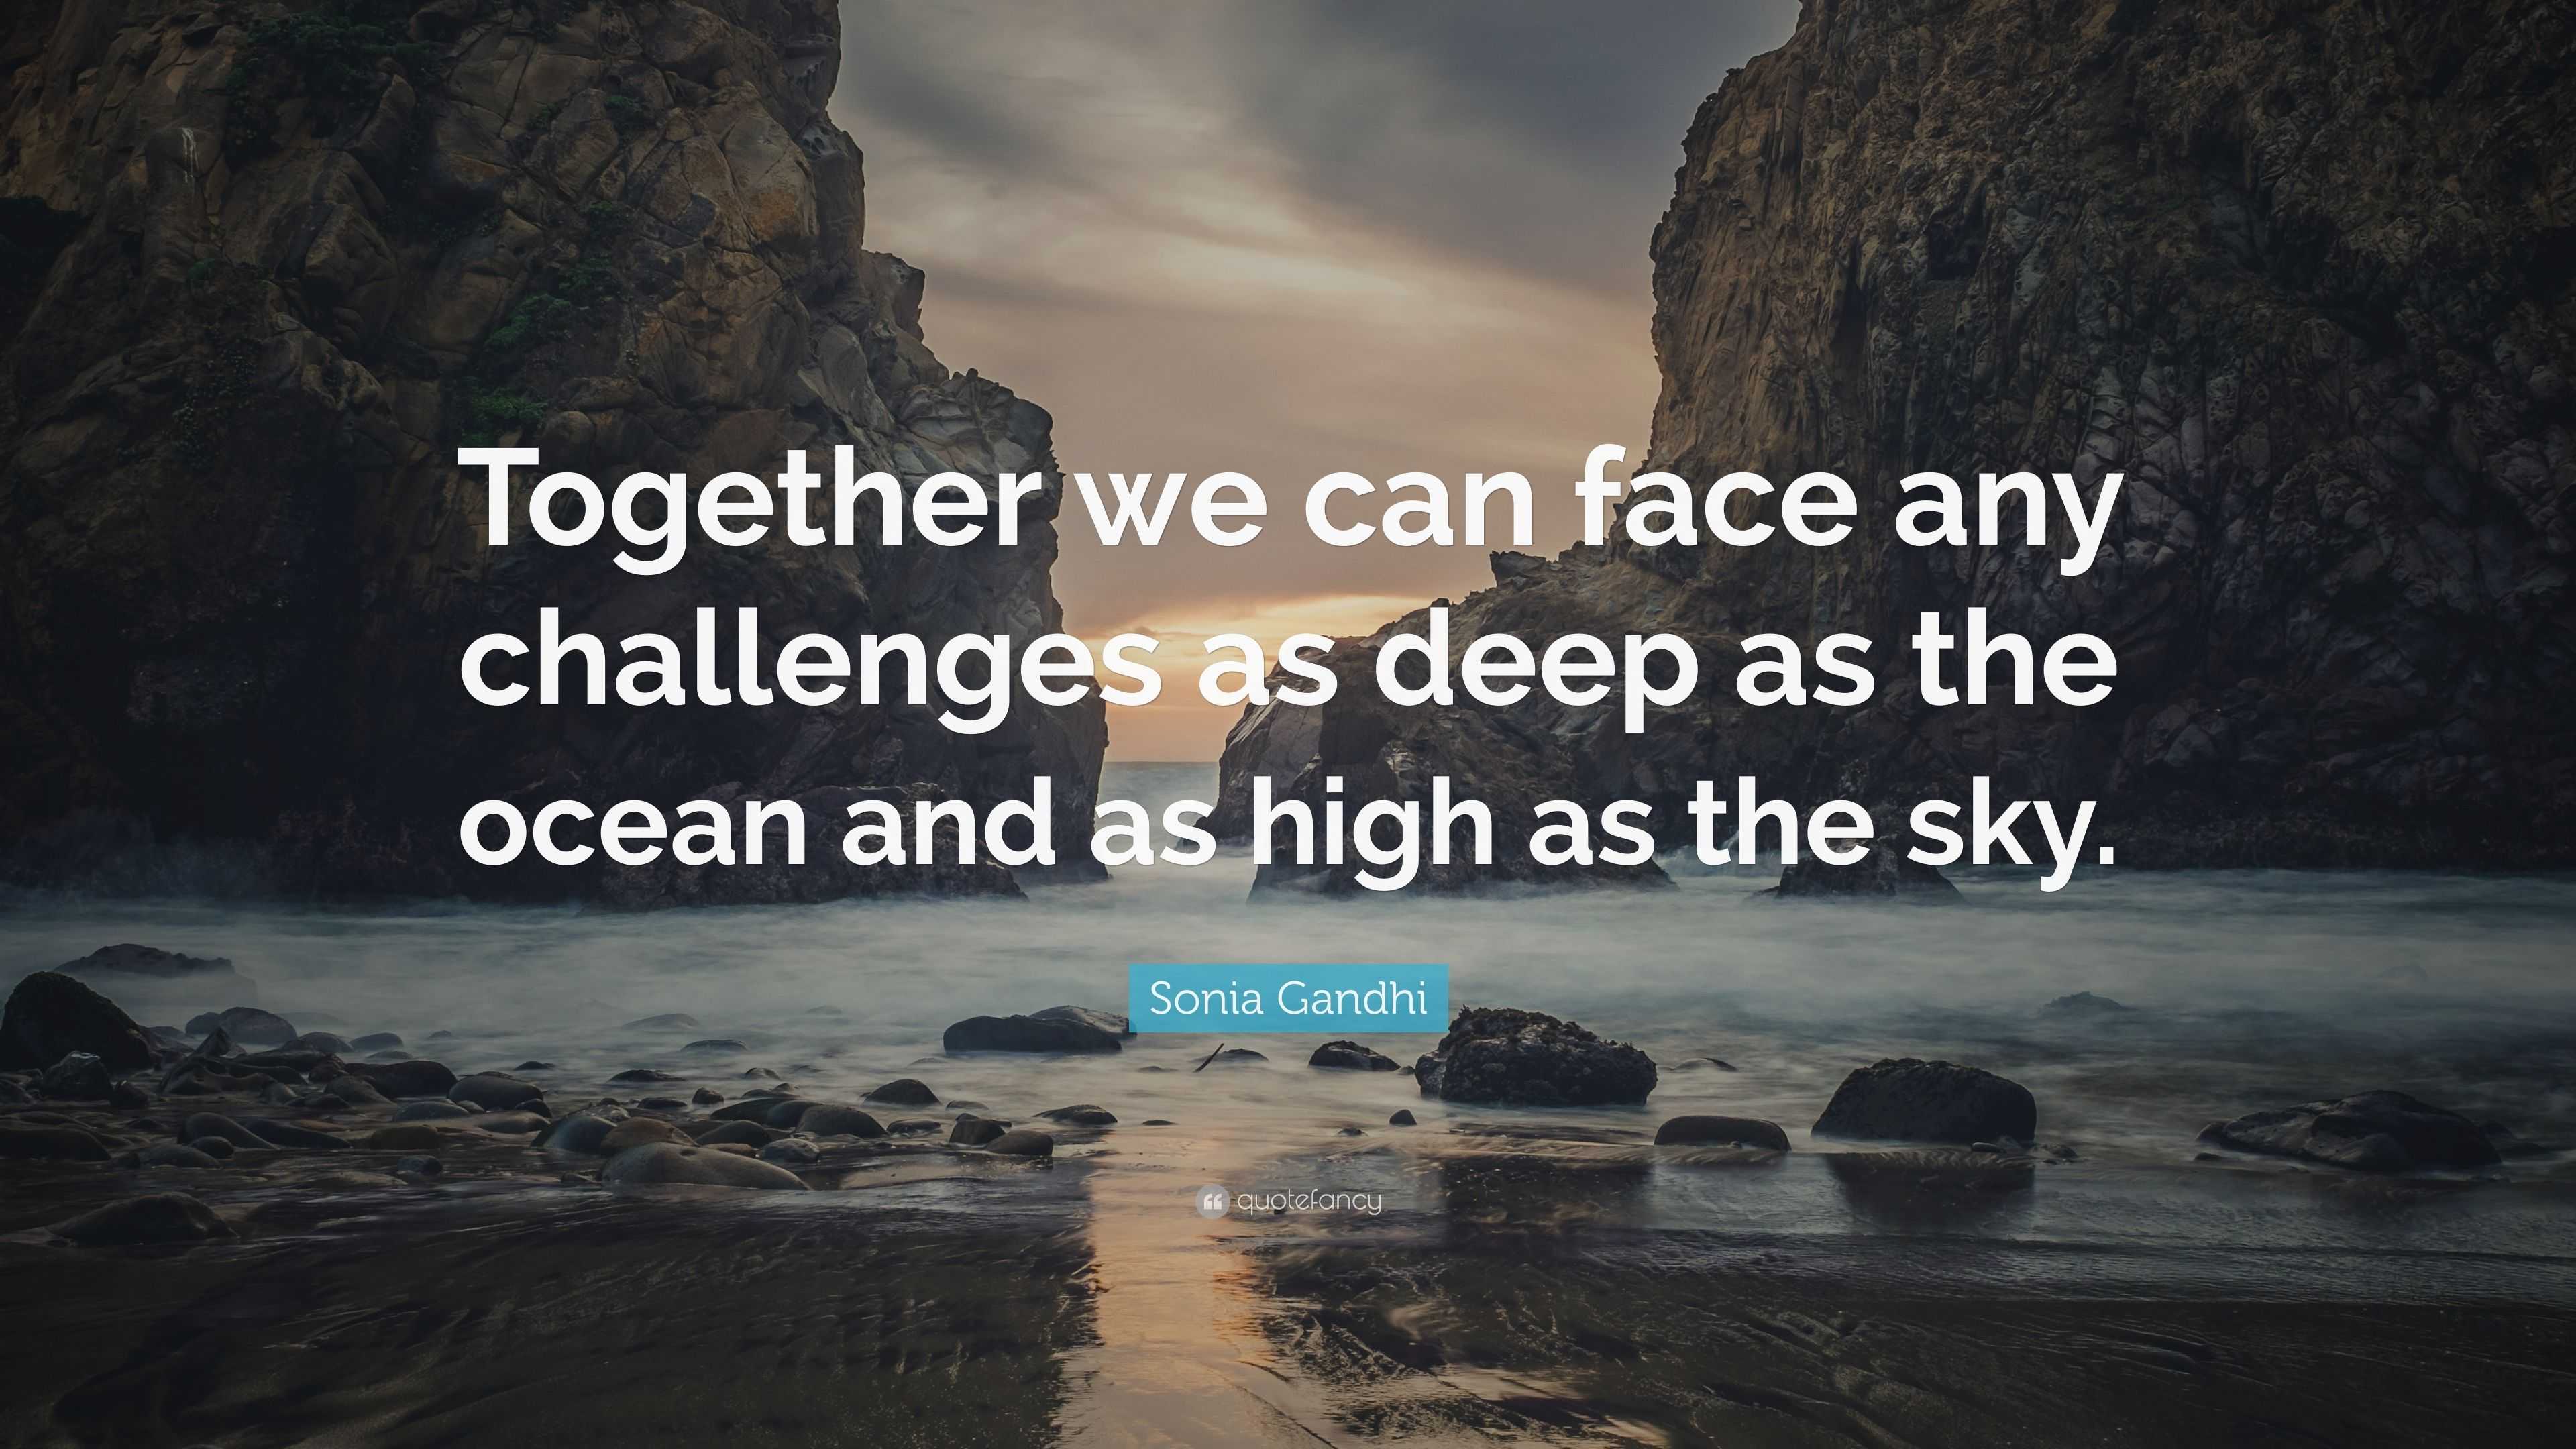 Sonia Gandhi Quote: “Together we can face any challenges as deep as the